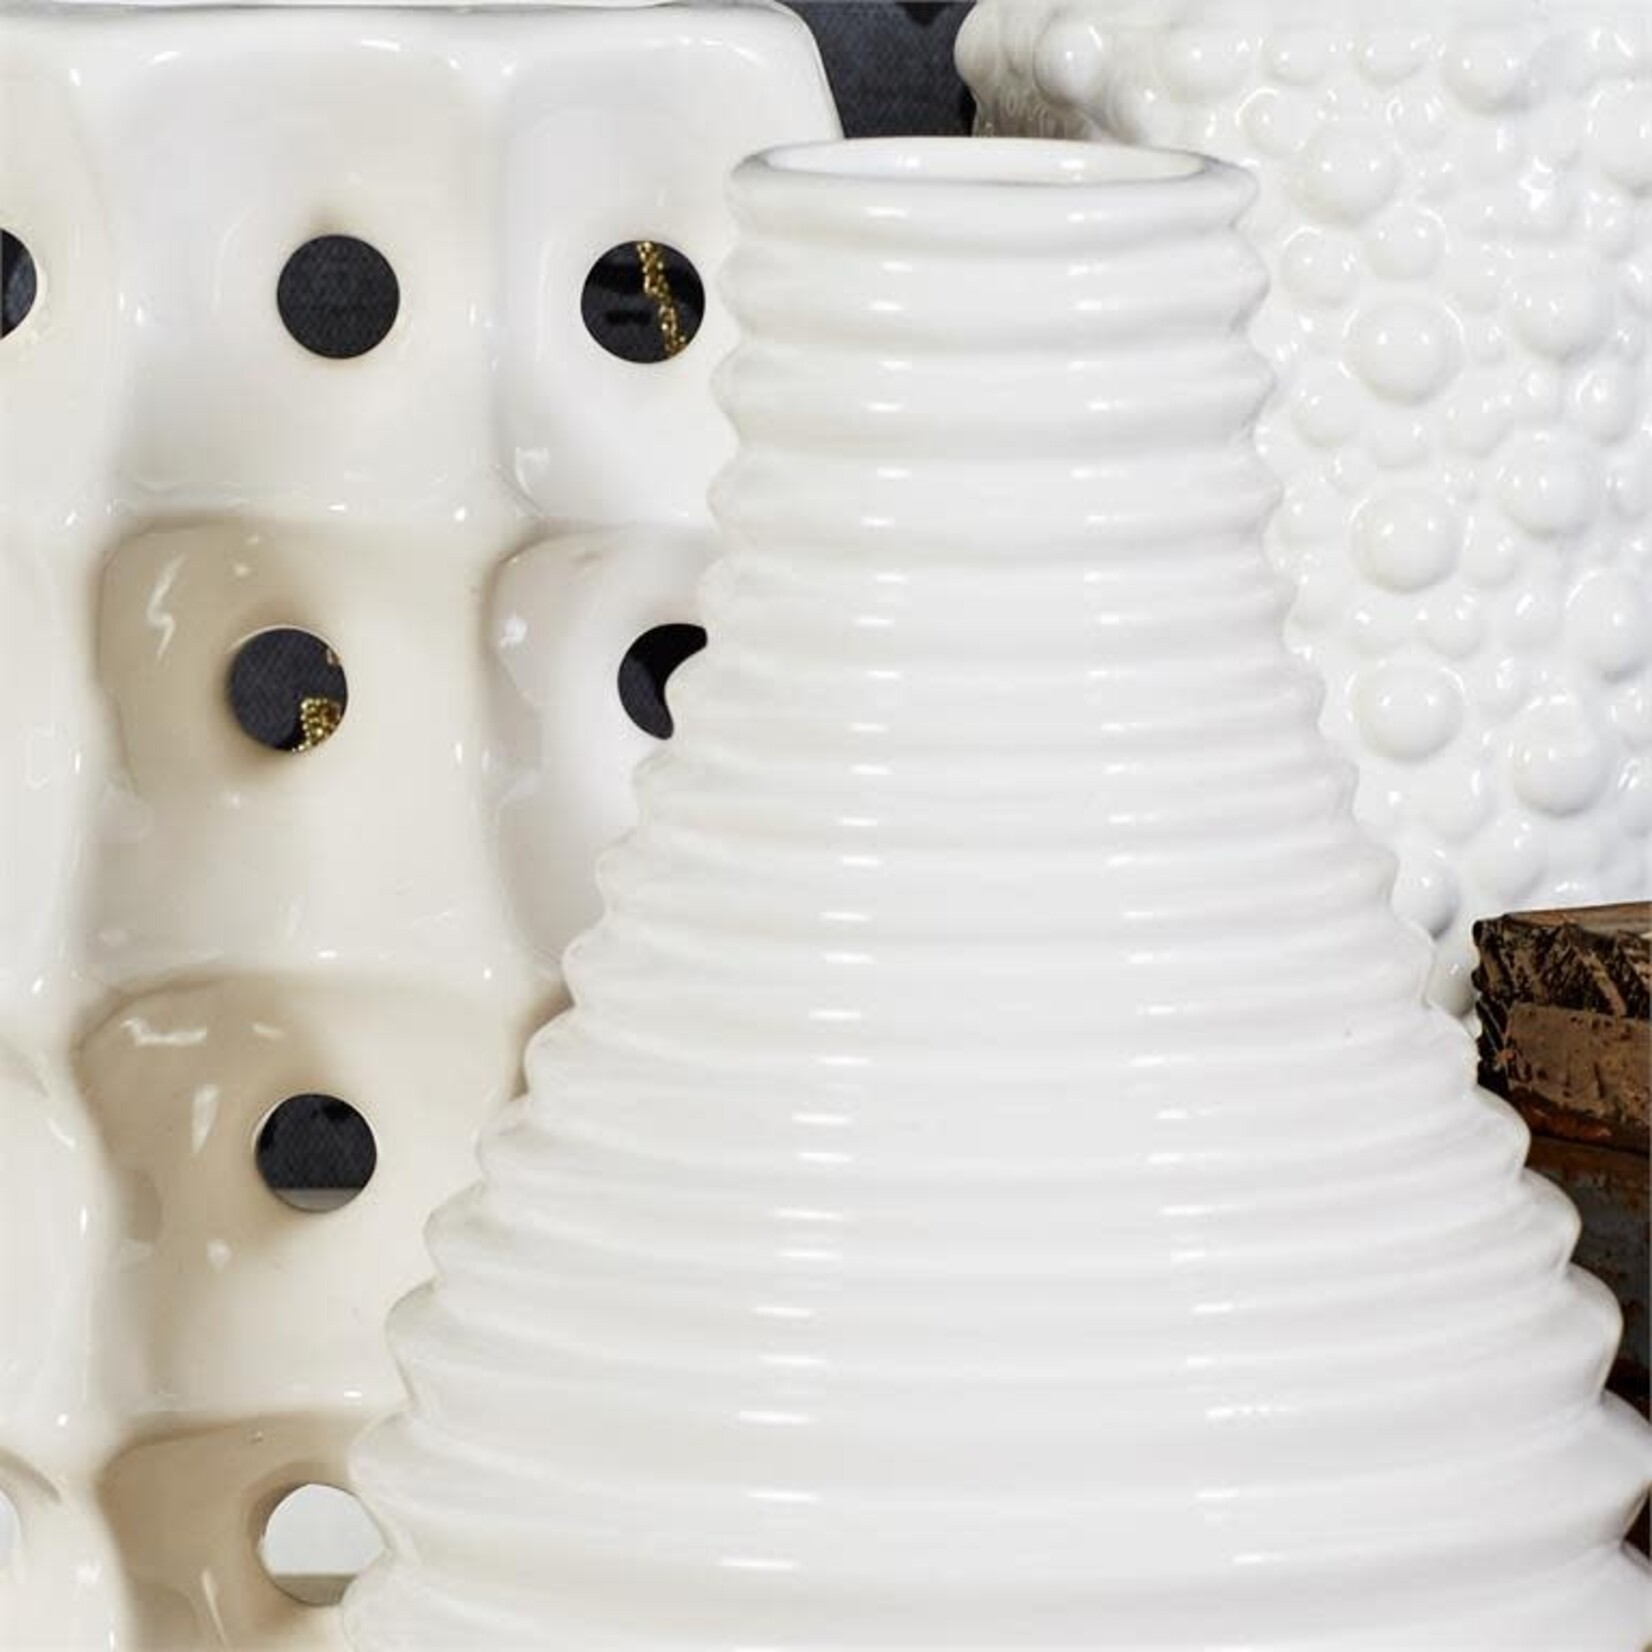 50% OFF WAS $23 NOW $11.50, 8”H X 5” WHITE CERAMIC VASE ASSORTED STYLES IN A BOX